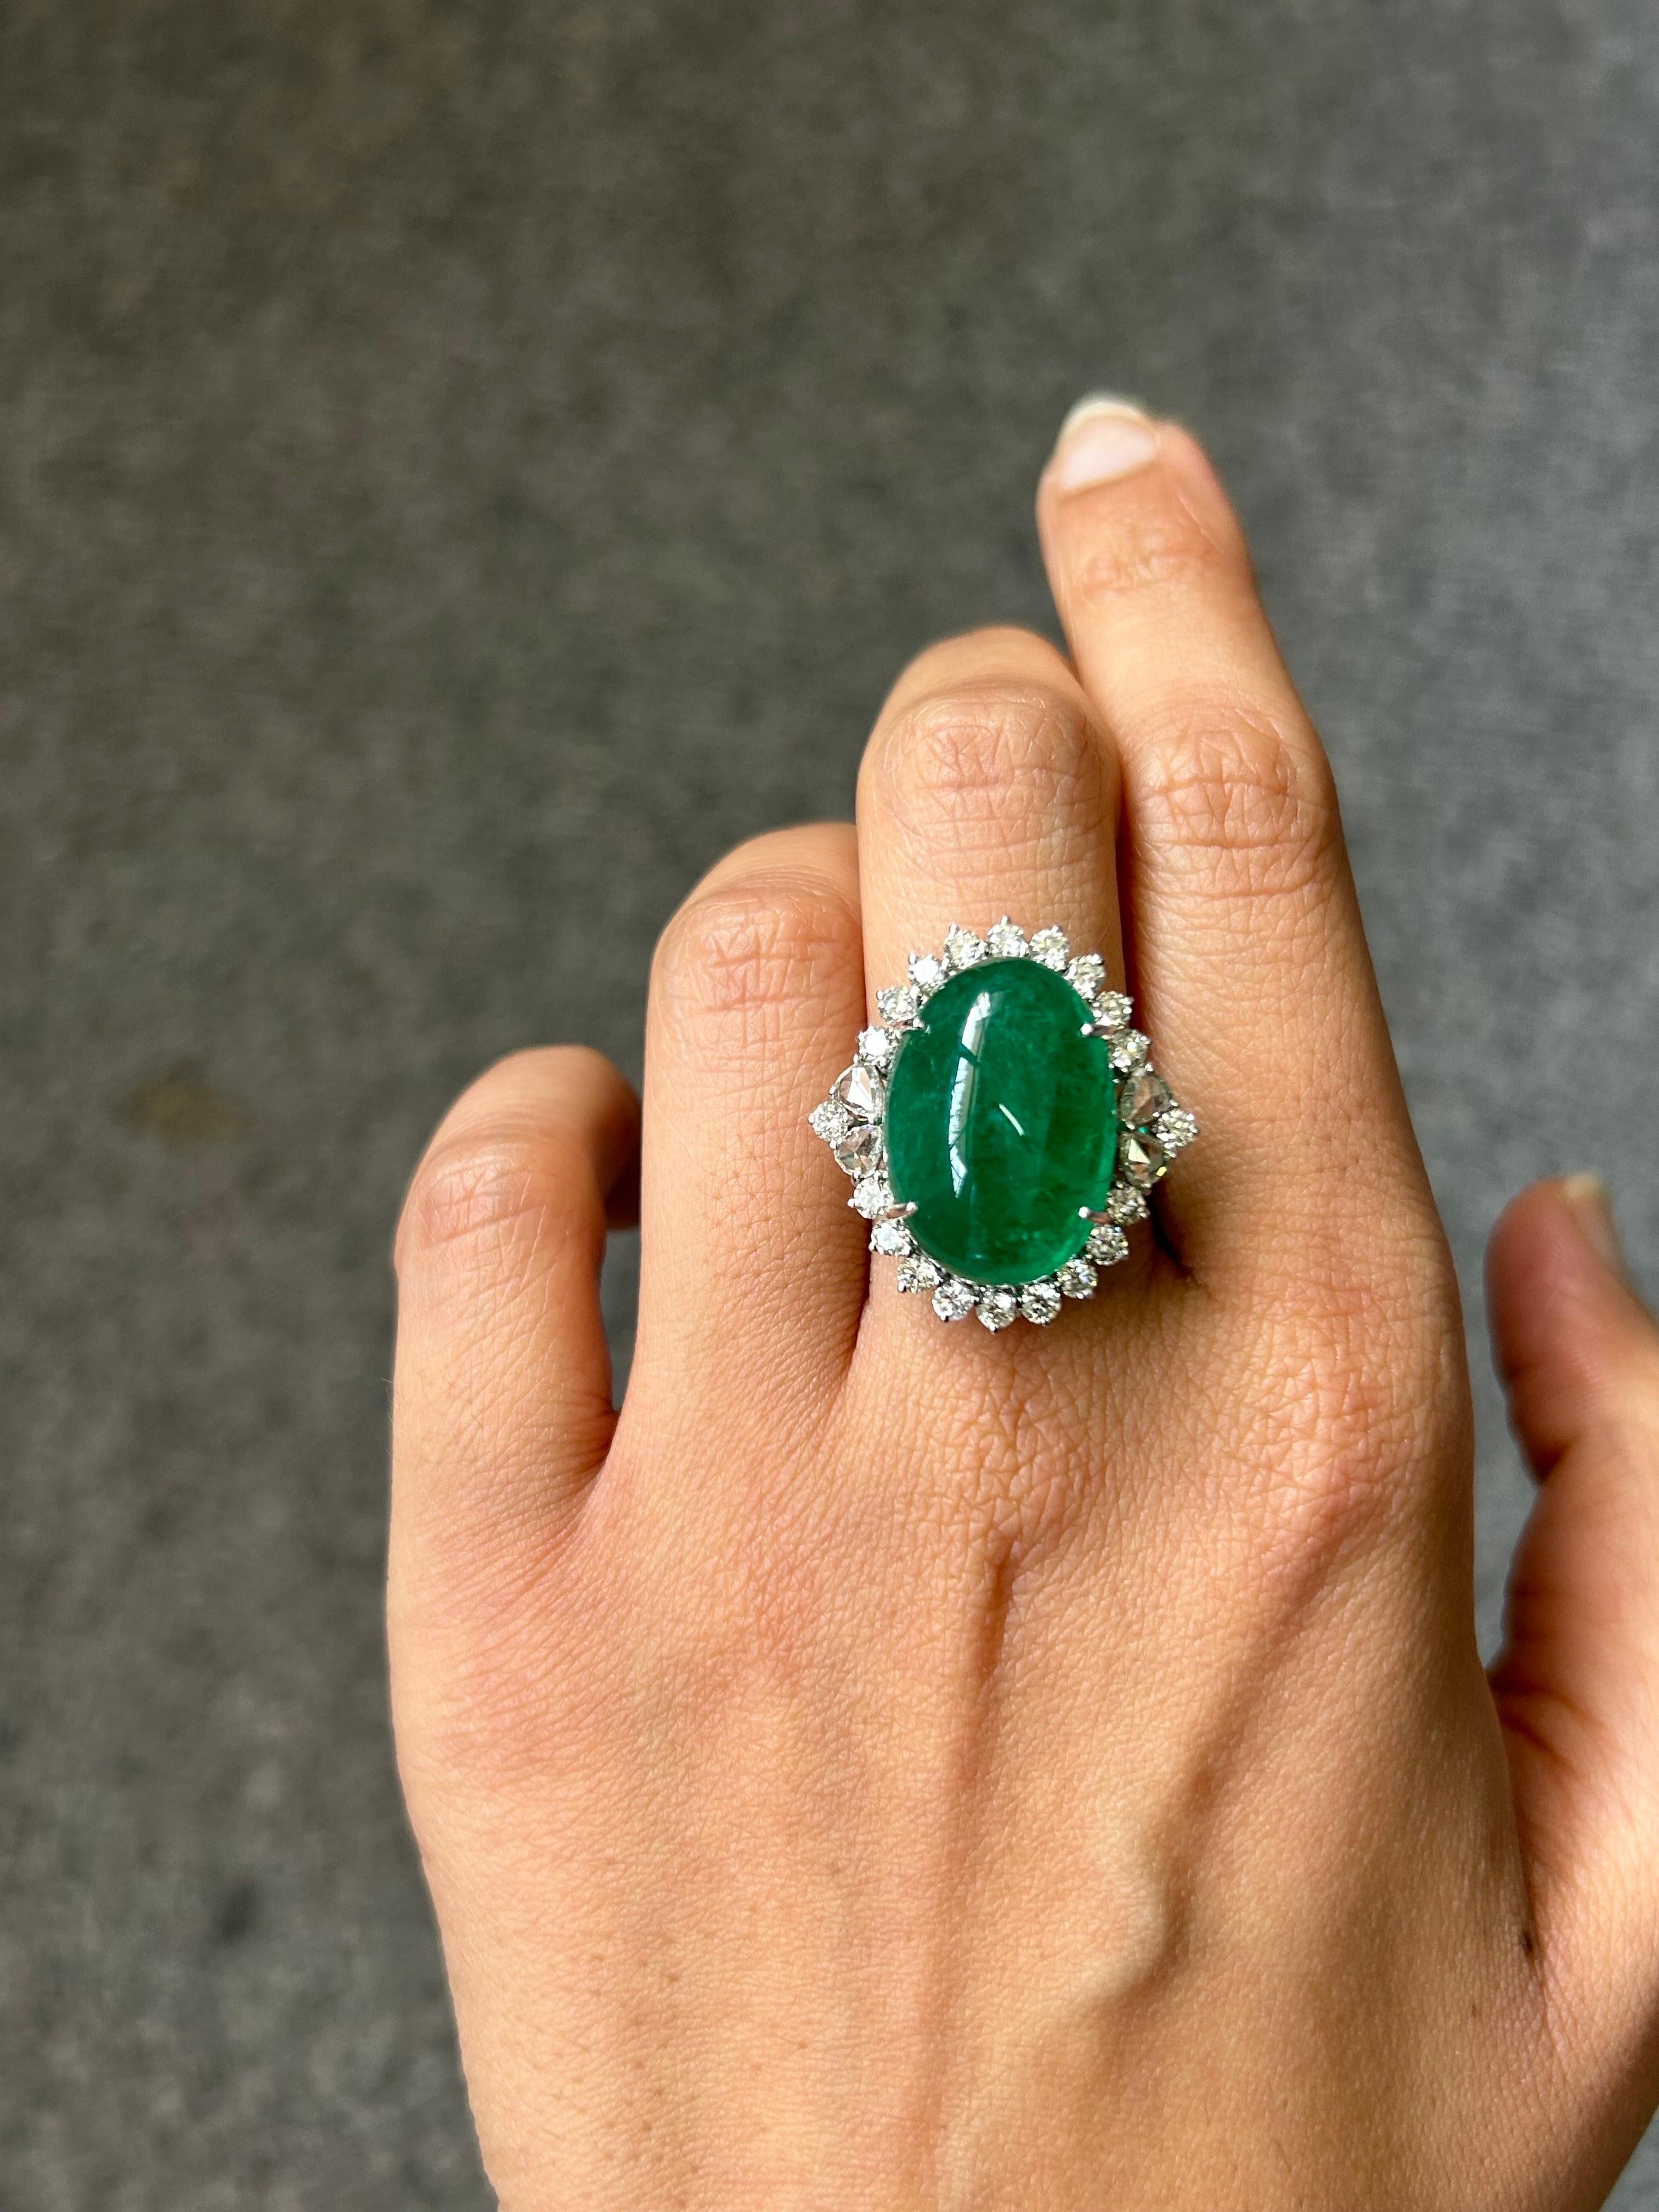 Make a statement with this stunning 19.55 carat Emerald Cabochon and 1.51 carat rose cut and full cut VVS quality White Diamond cocktail ring. The mix of the two Diamond cuts gives the ring an art-deco, yet modern look. The natural Emerald